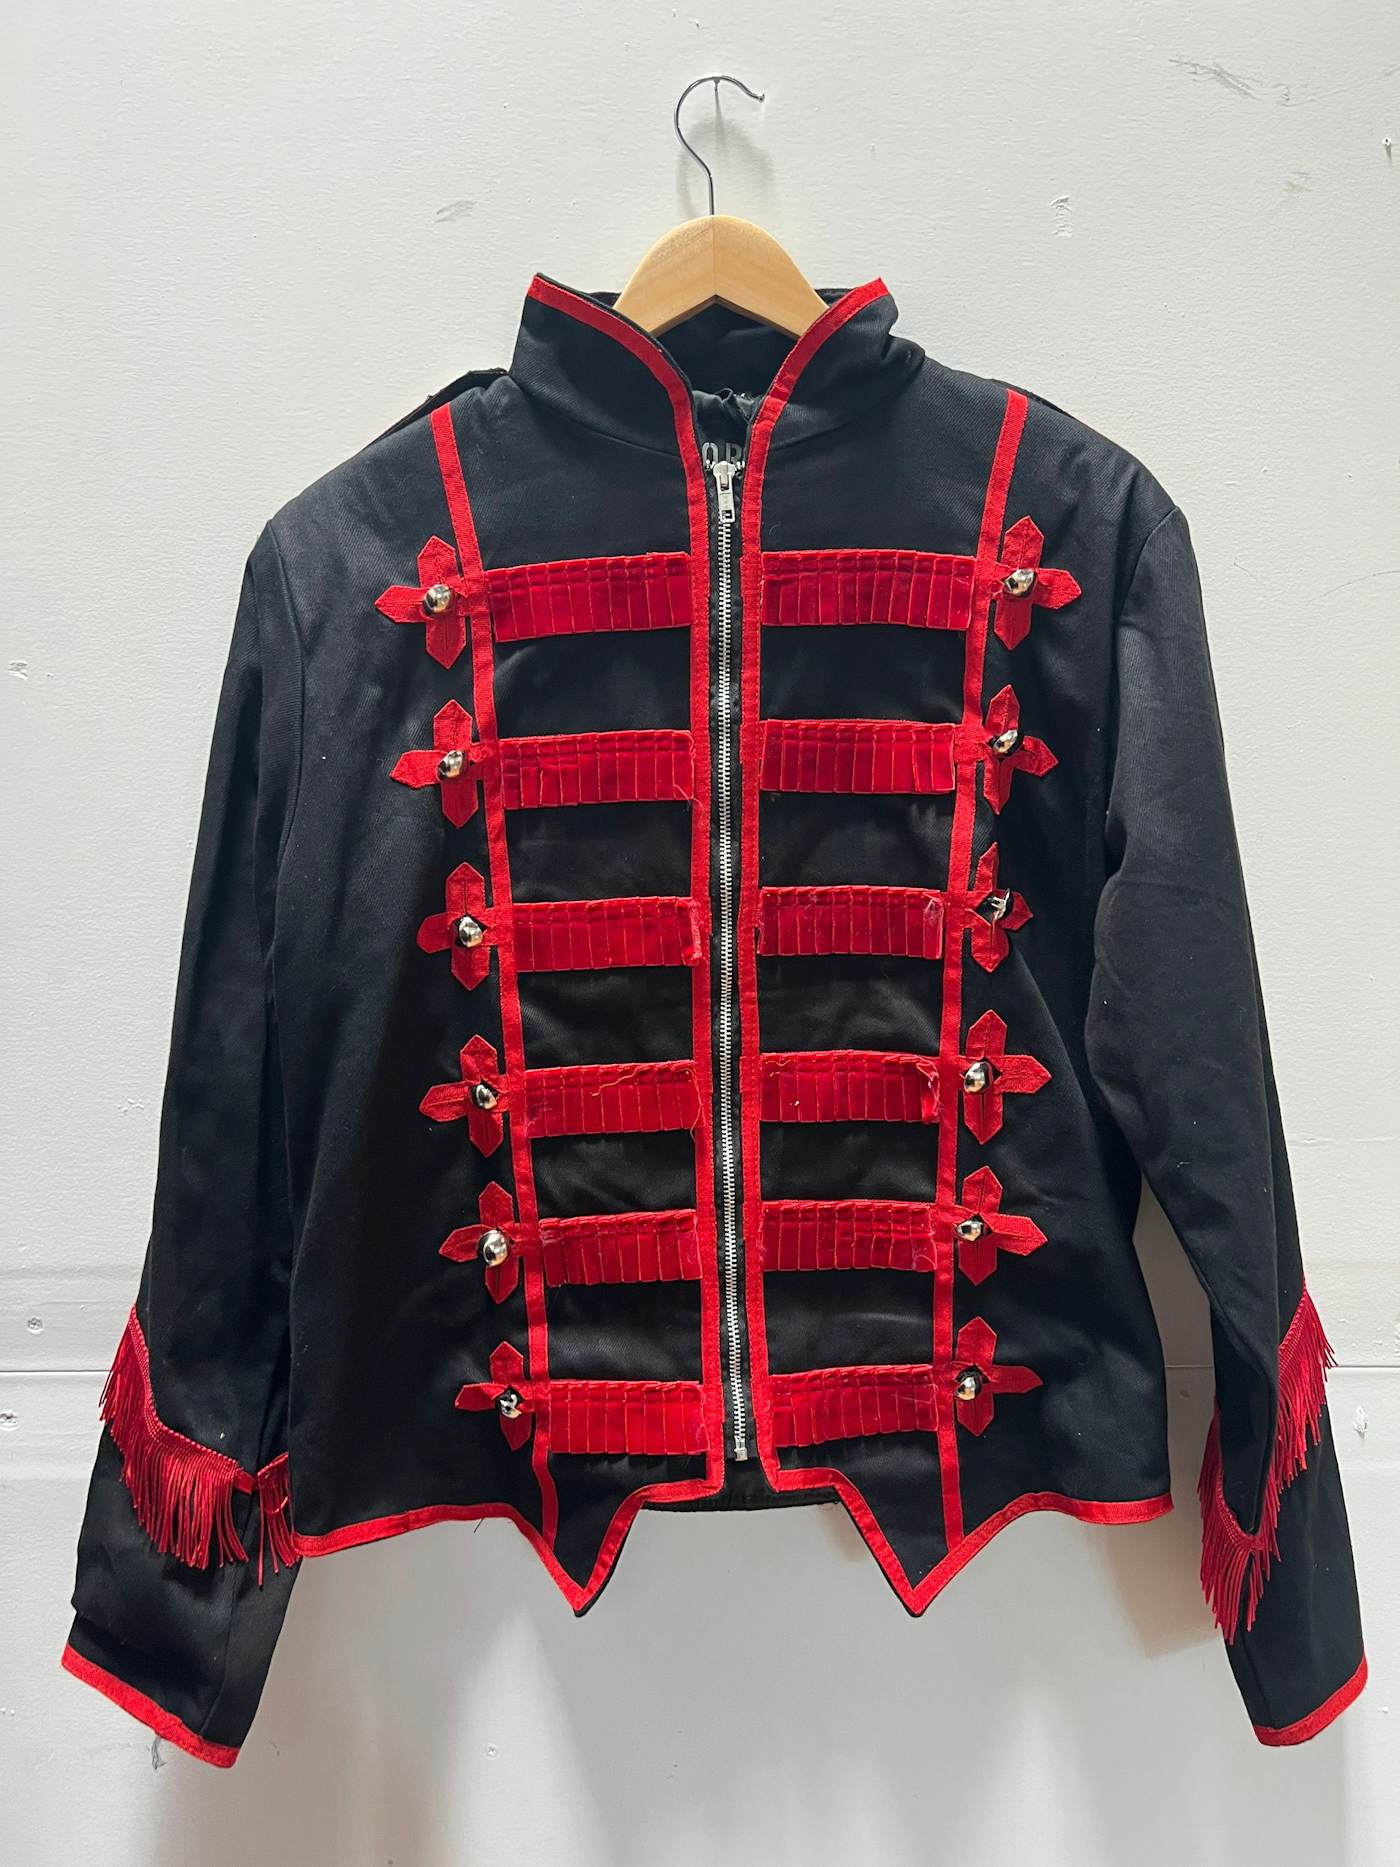 Military Marching Band Drummer Jacket